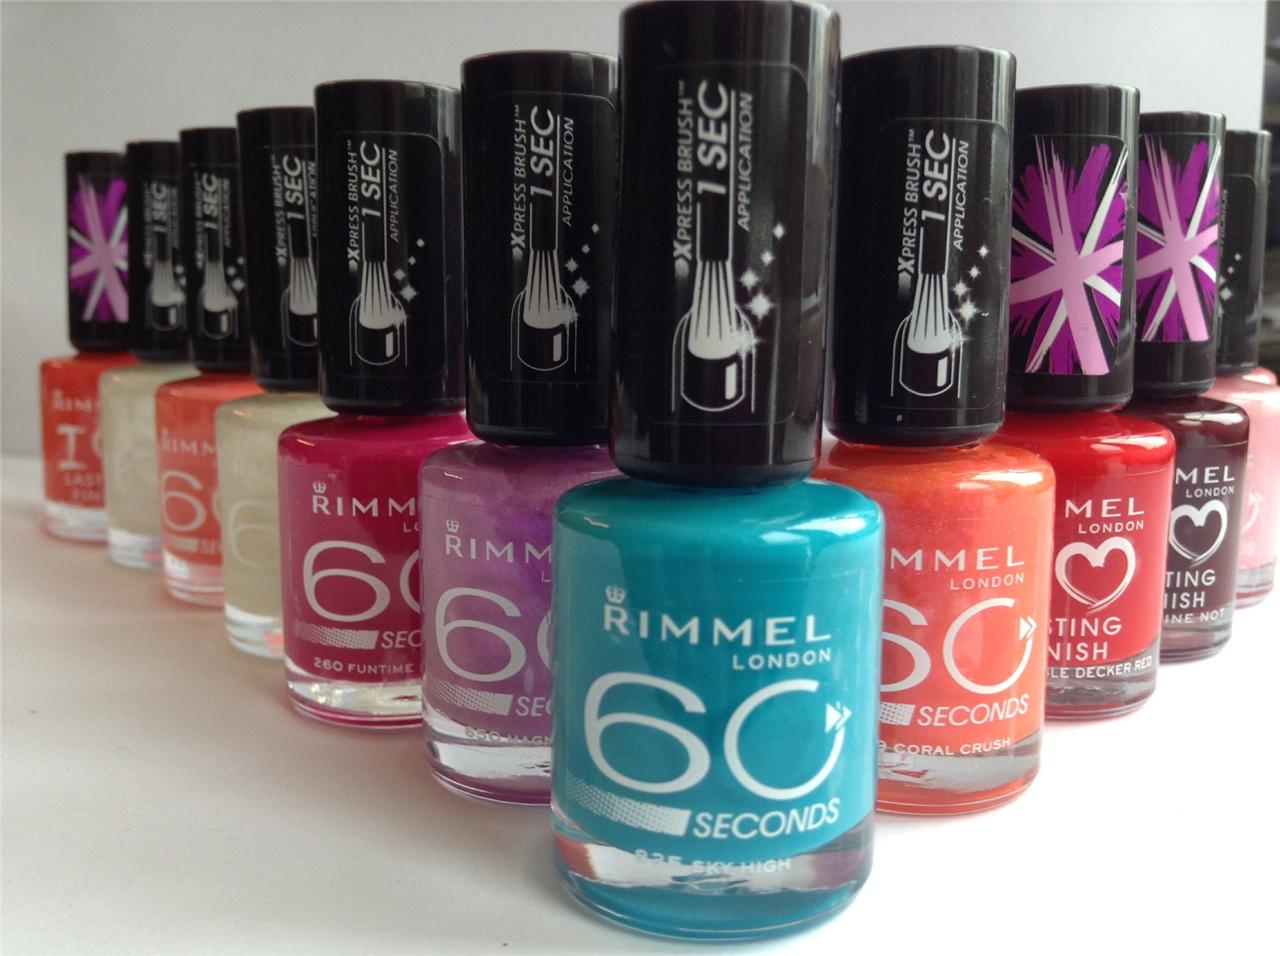 7. Rimmel London 60 Seconds Super Shine Nail Polish in "Black Out" - wide 10